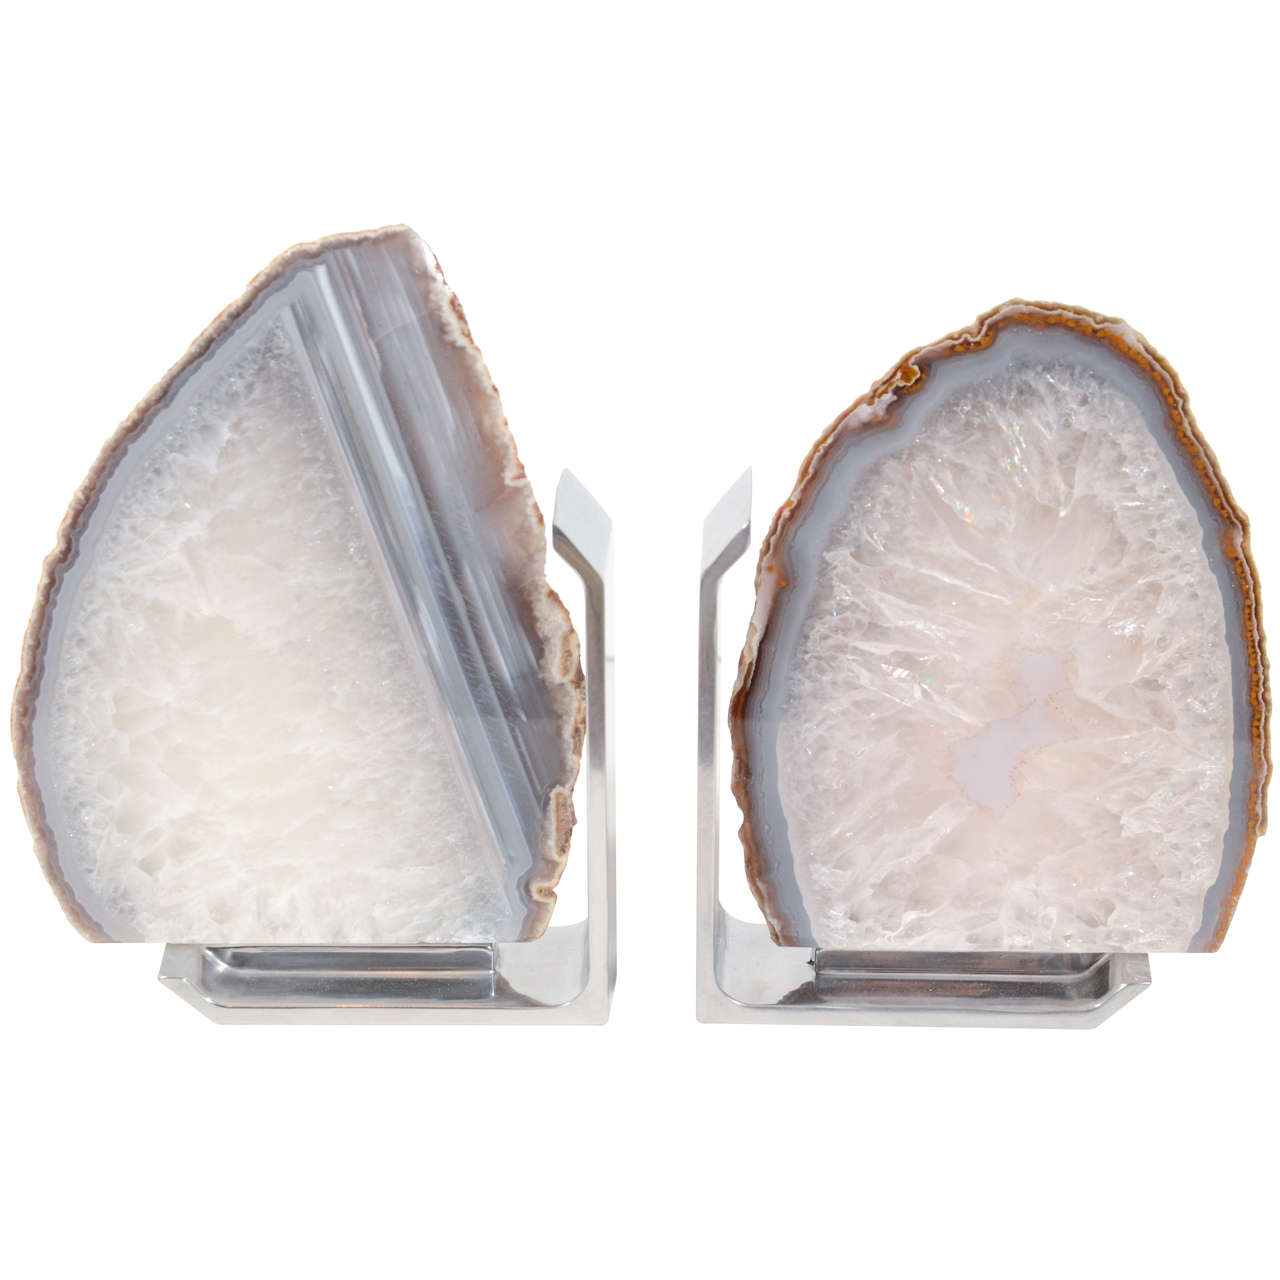 Pair of Natural Agate Stone Bookends with Polished Chrome Stands